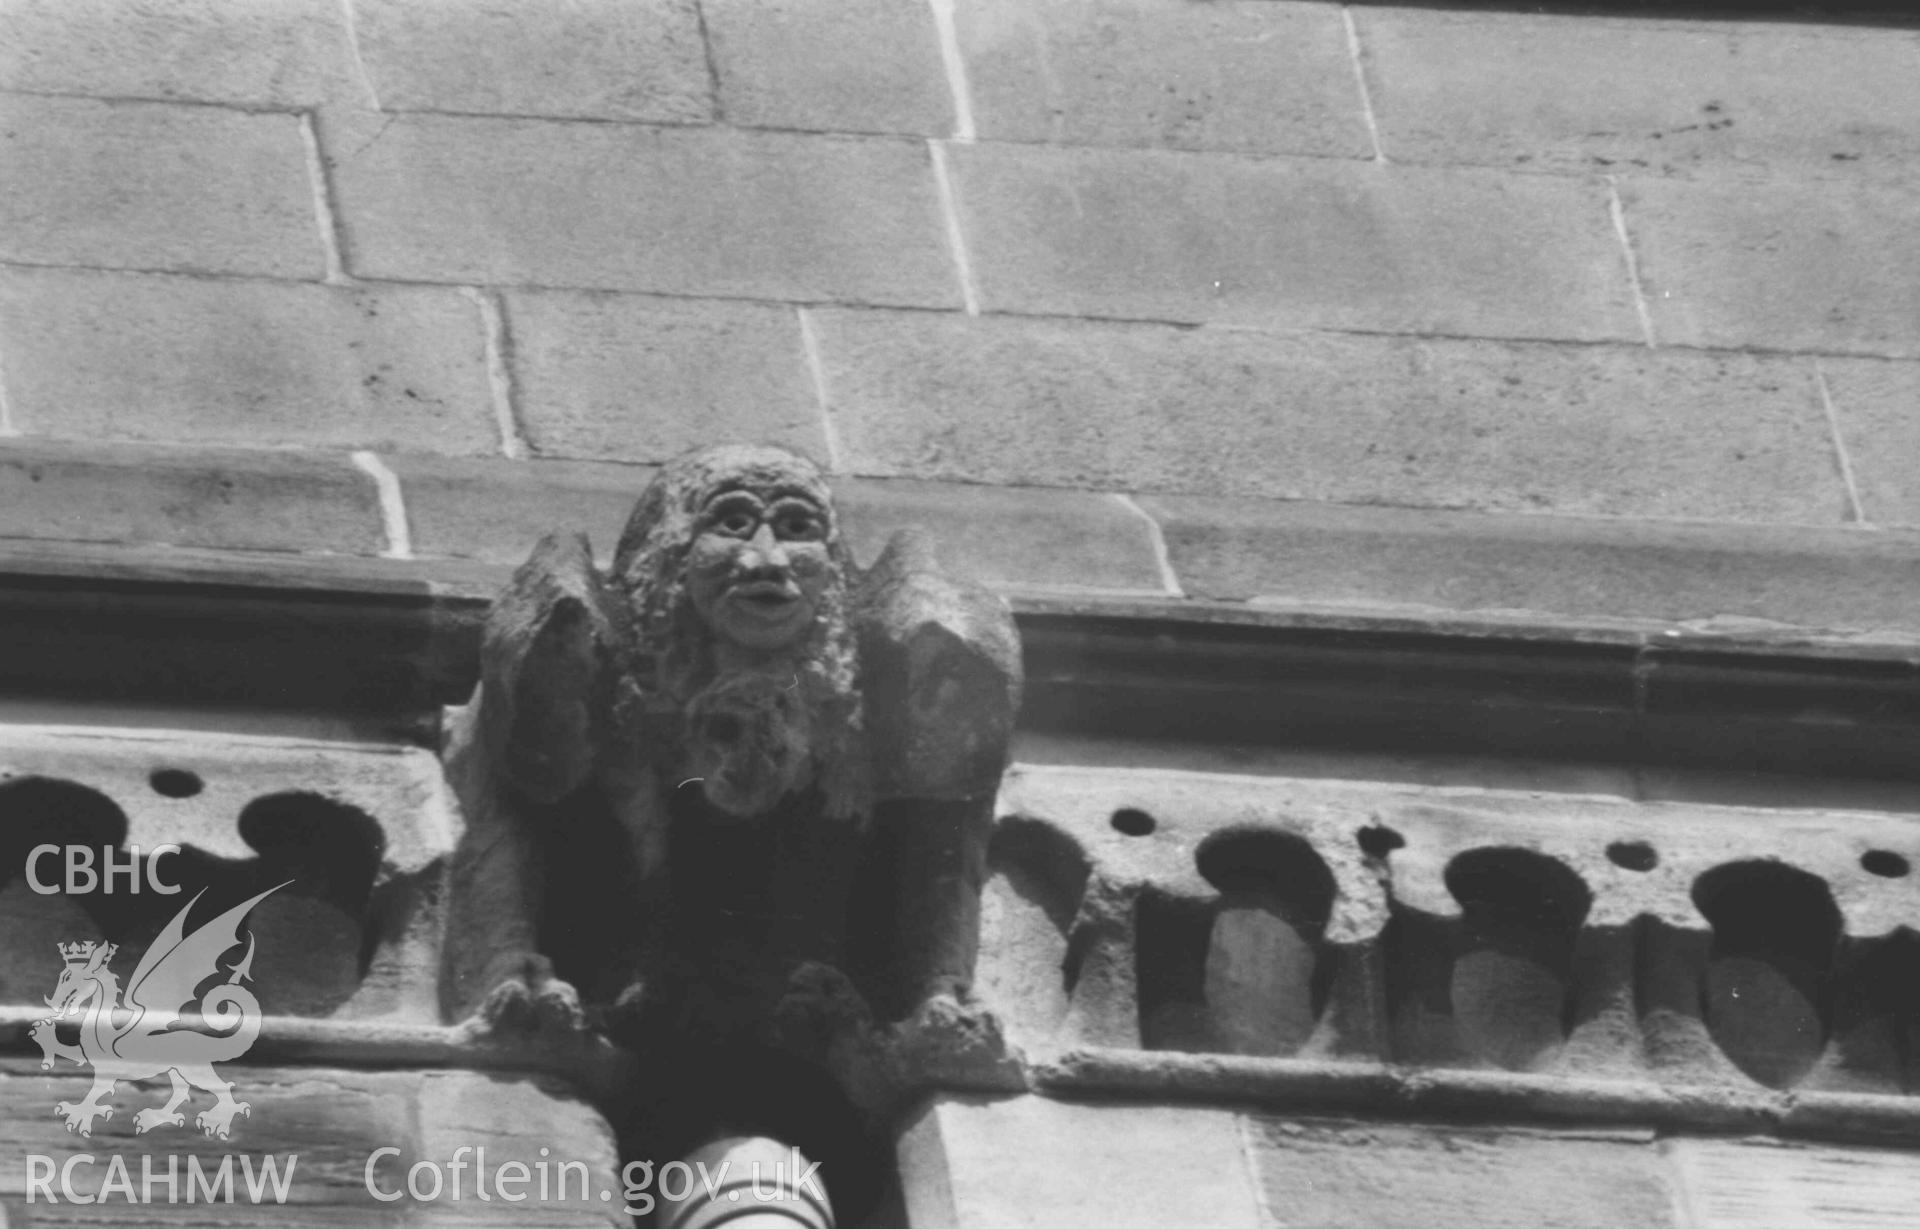 Digital copy of a black and white negative showing gargoyles on the south east side of the UCW building overlooking King Street, Aberystwyth (Telephoto). Photographed by Arthur Chater on 2 April 1969. Grid Reference SN 581 817.